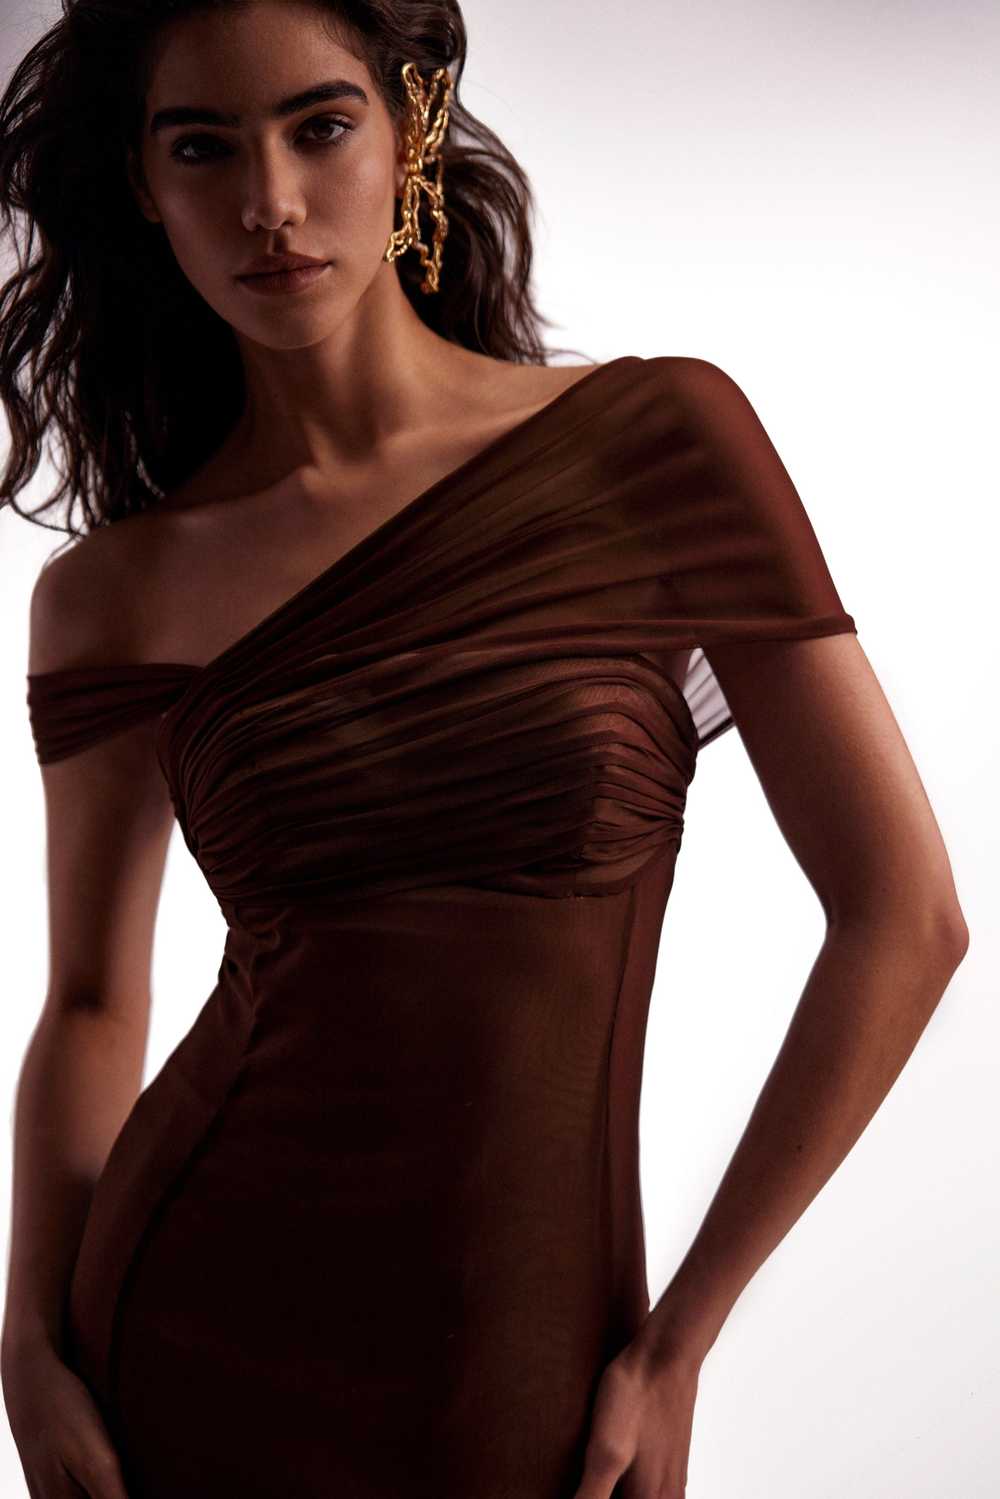 Milla Second-skin maxi dress in chocolate color - image 6